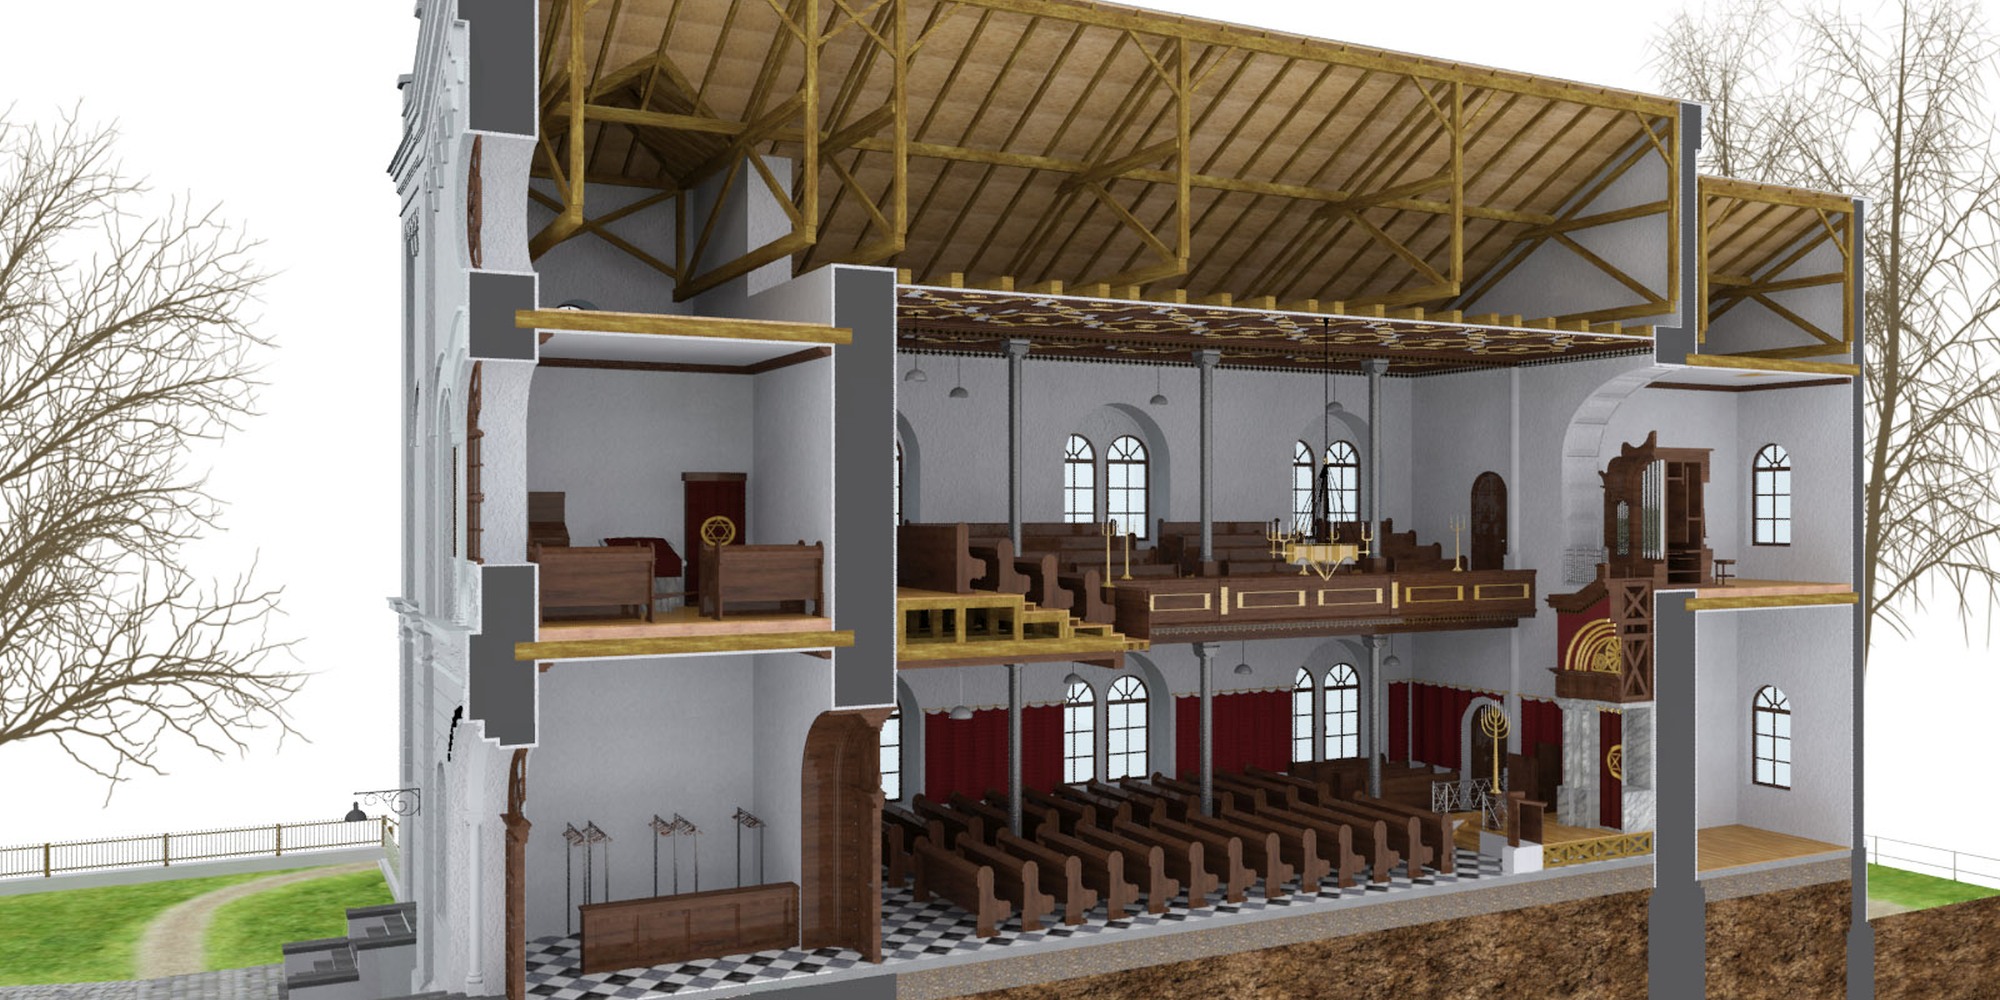 Virtual reconstruction of the Synagogue in Linz